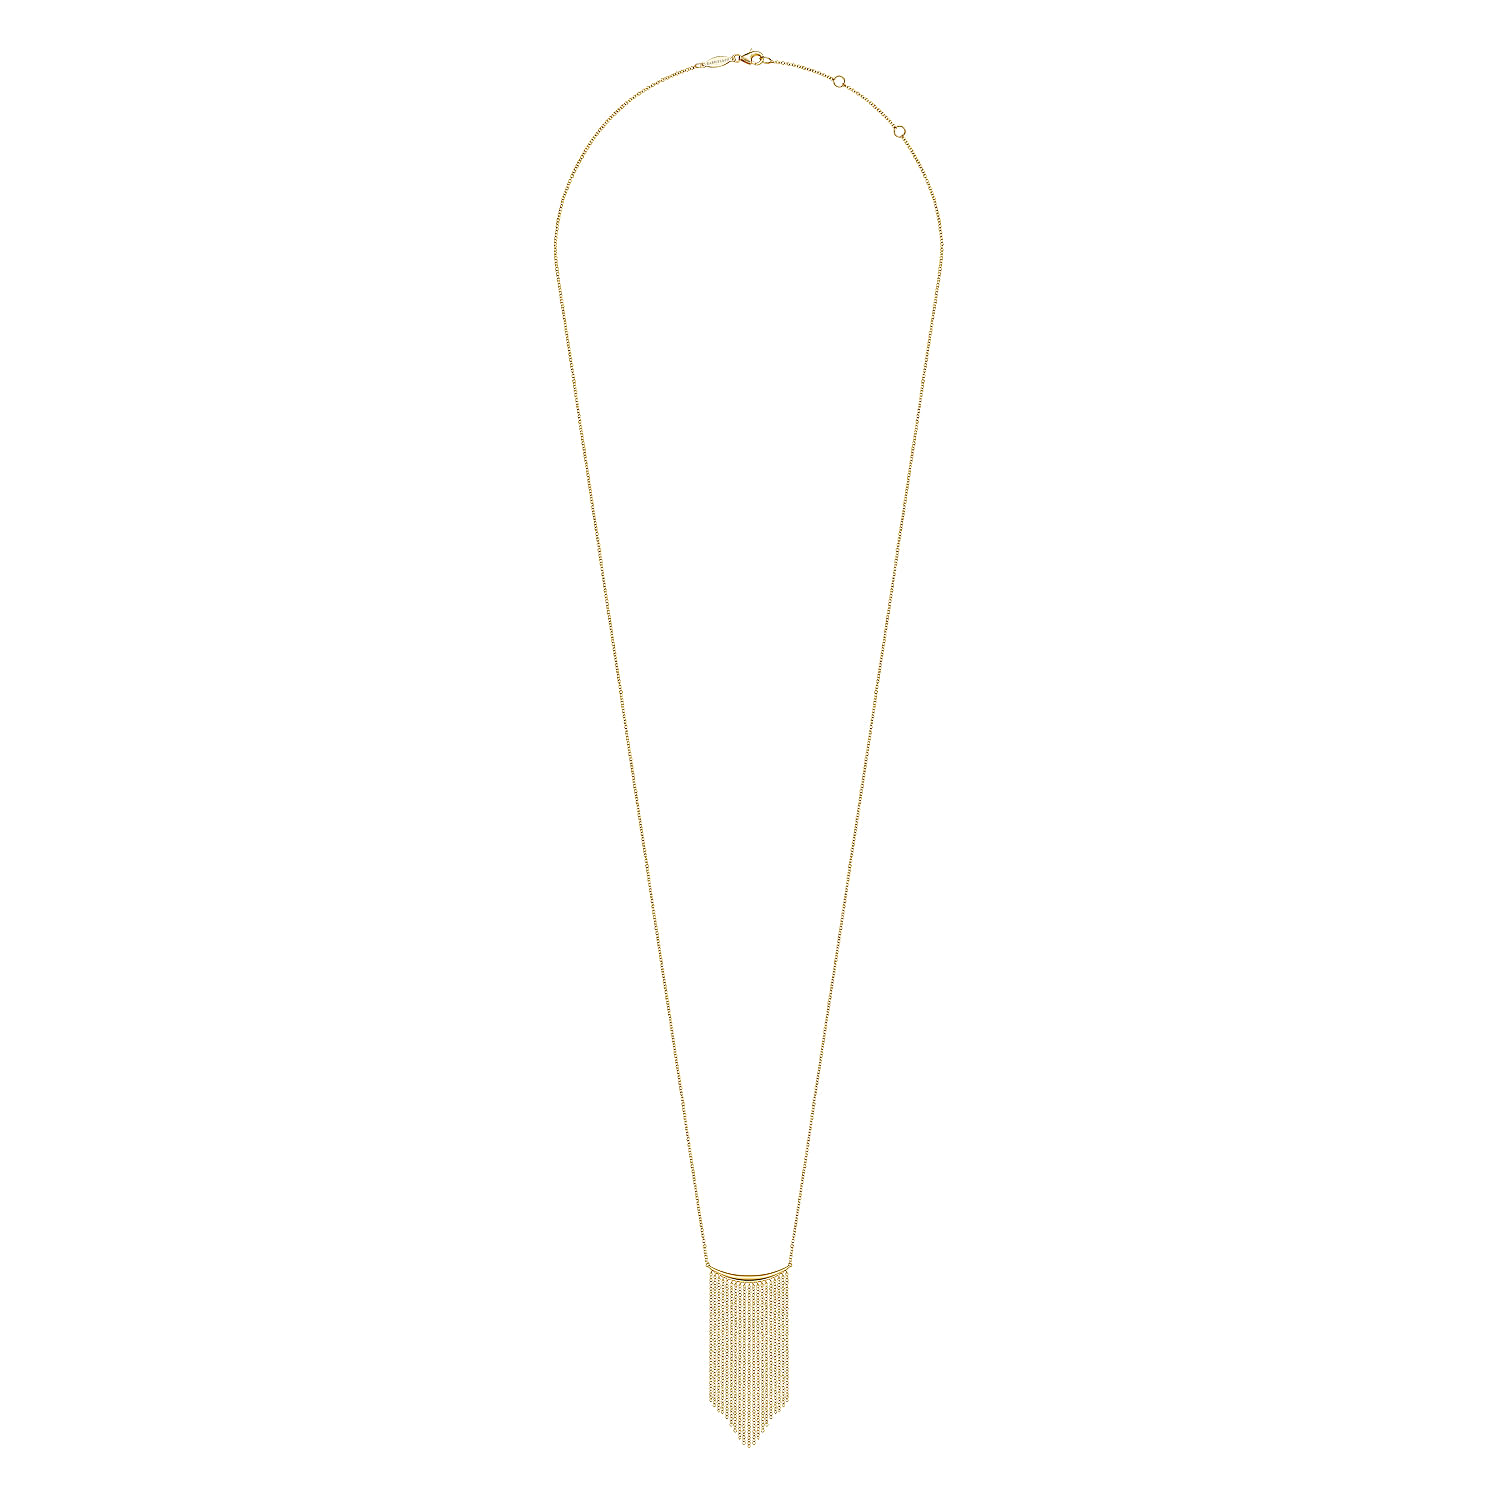 32 inch 14k Yellow Gold Curved Bar And Waterfall Chain Necklace